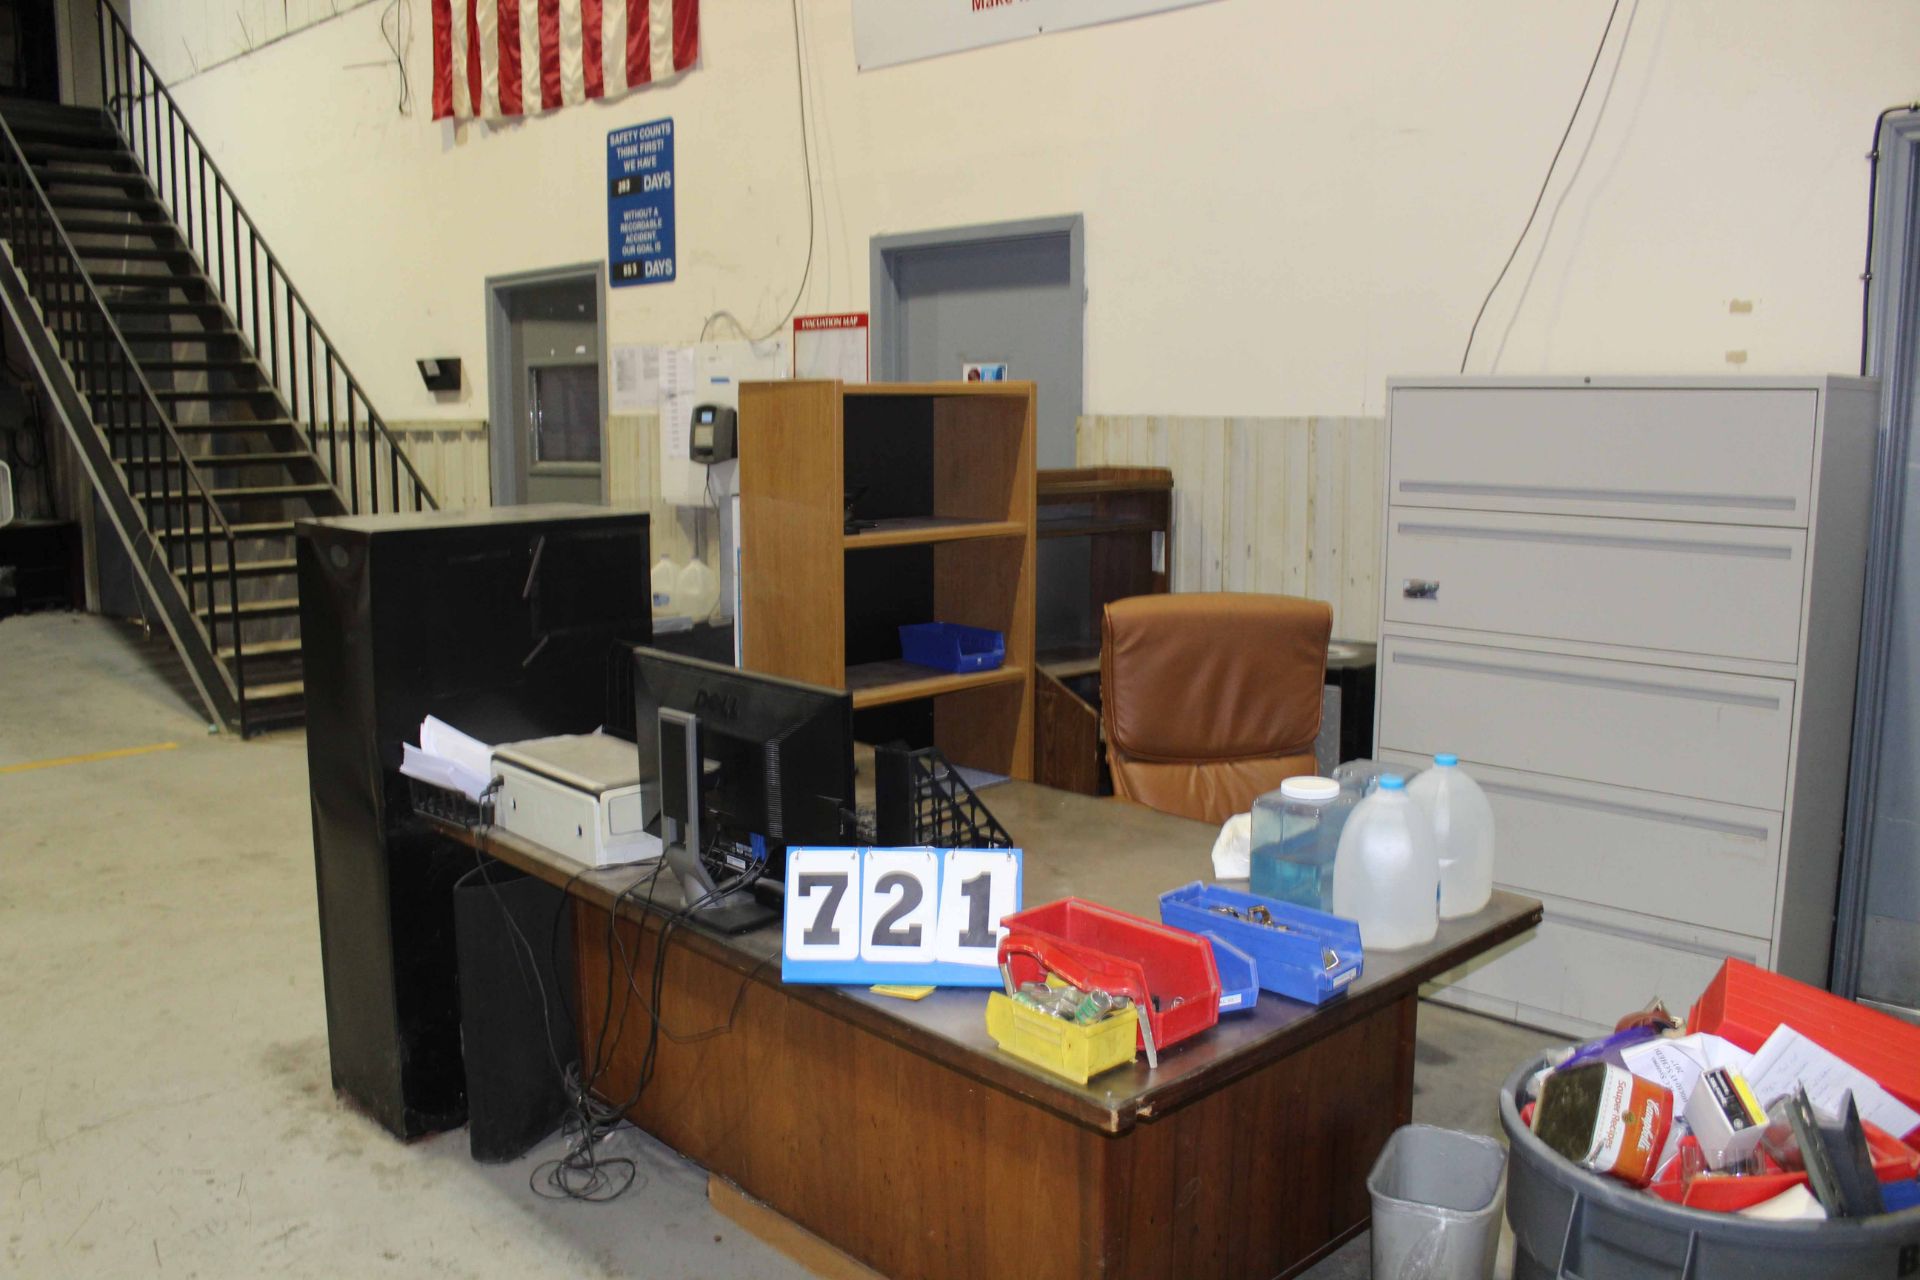 LOT CONSISTING OF: desk, chair, file cabinets